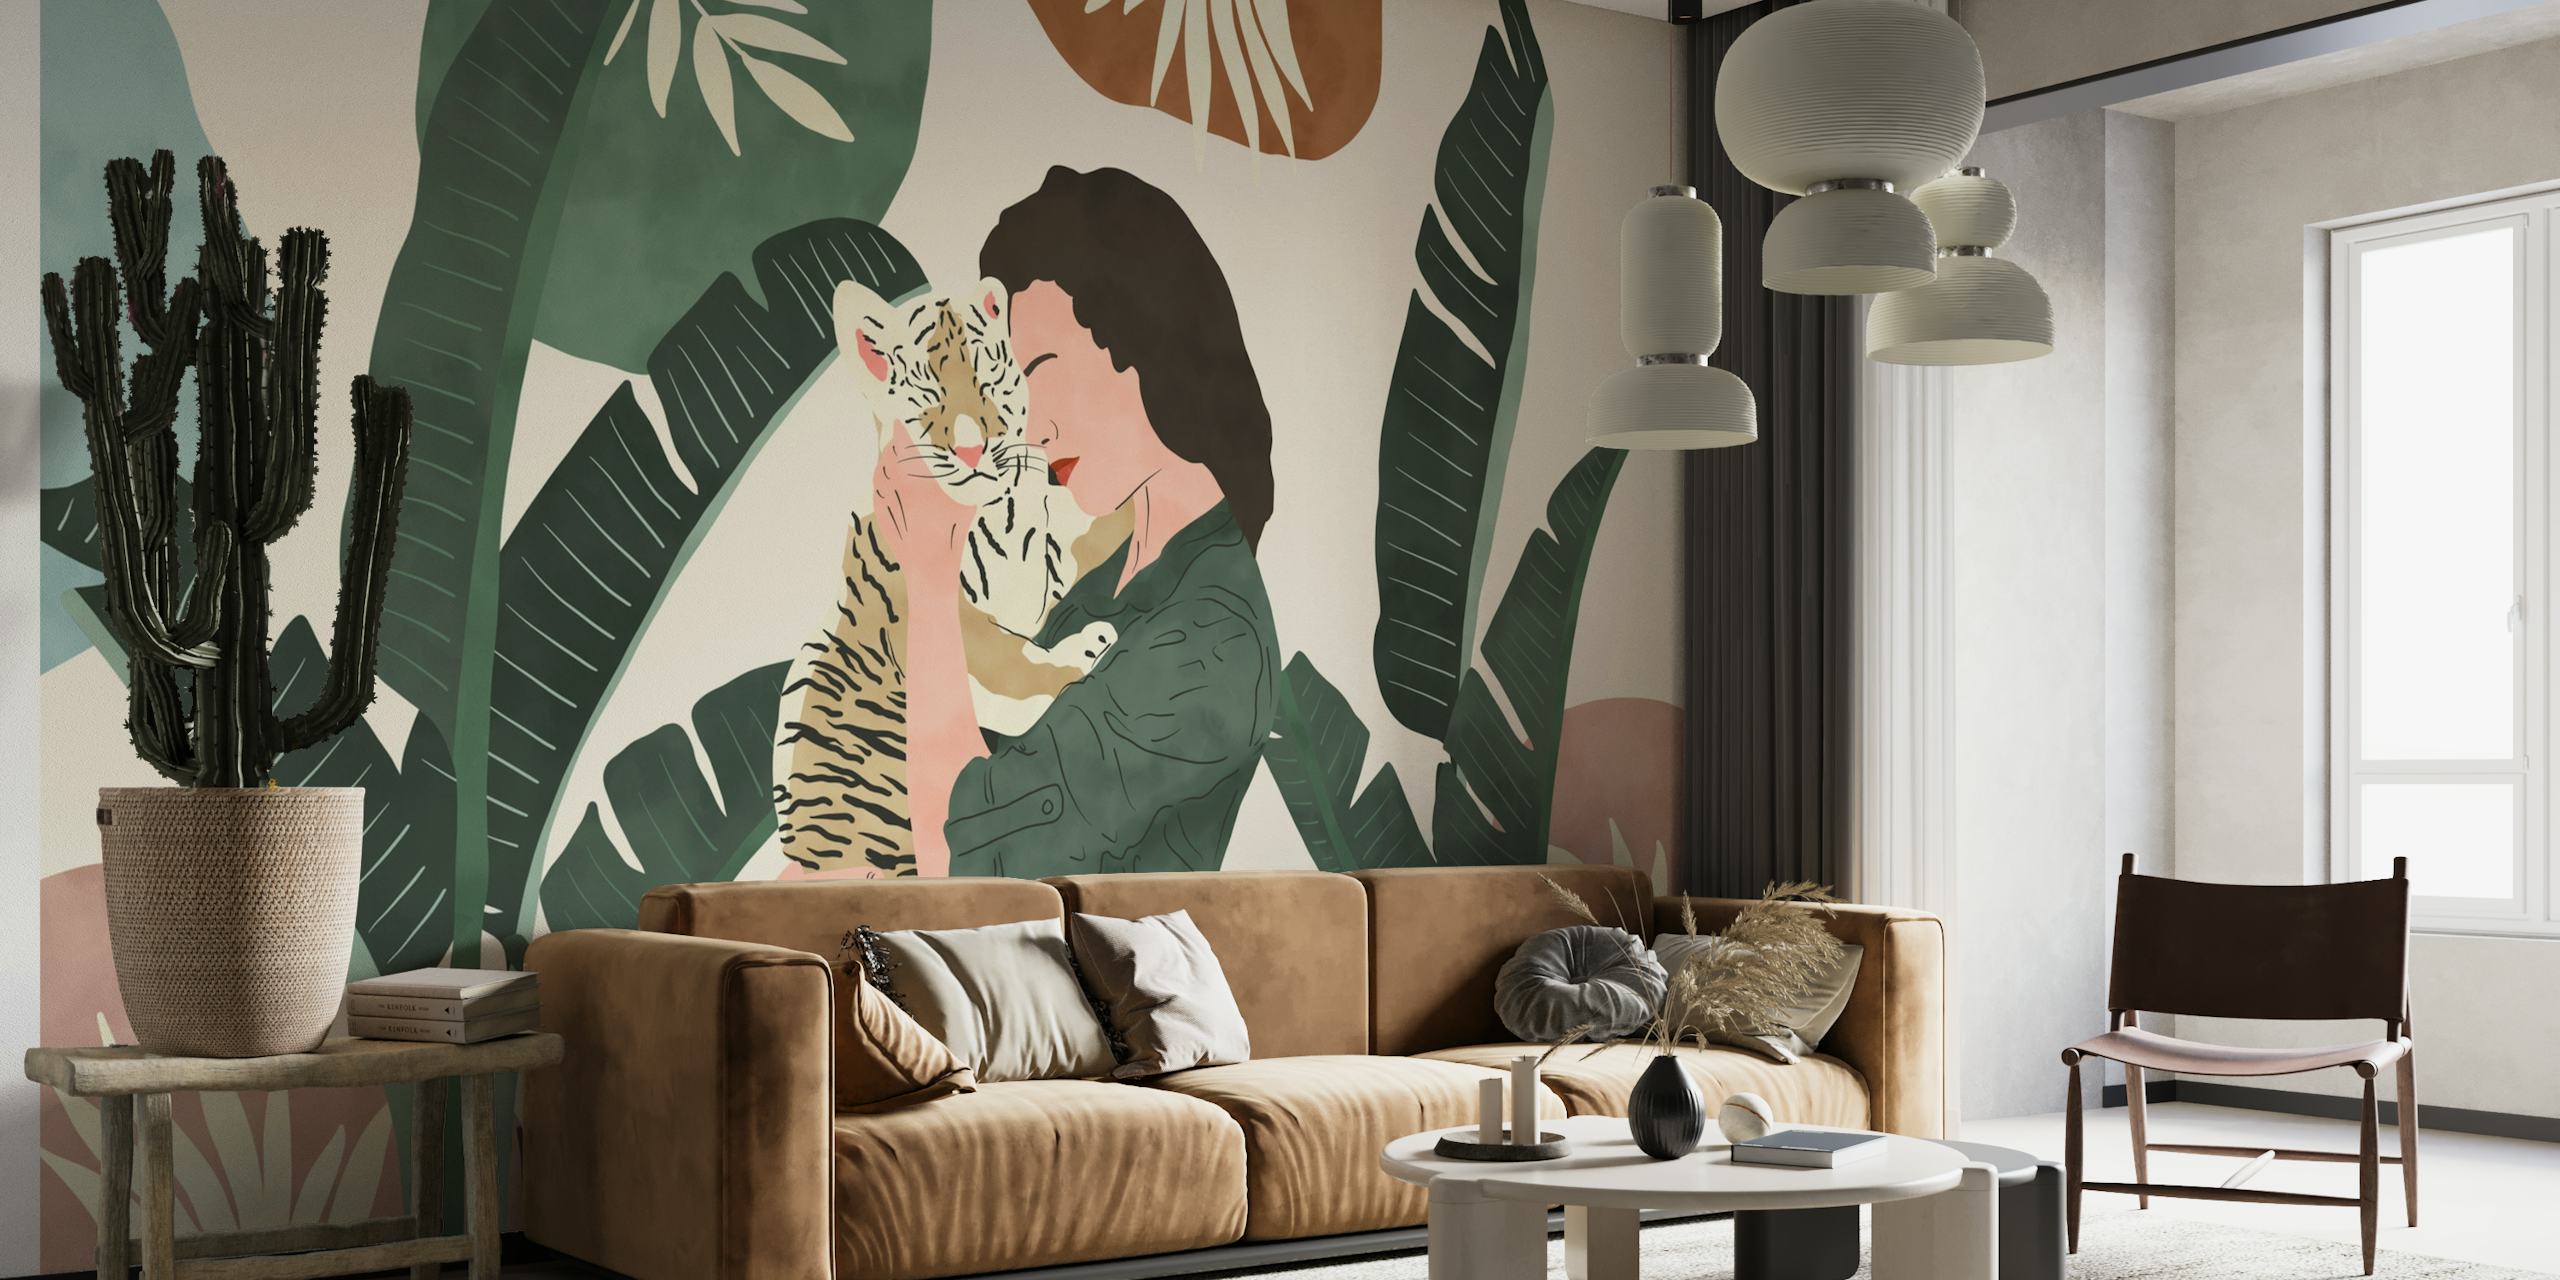 Illustration of a person embracing a tiger amidst tropical foliage on a wall mural